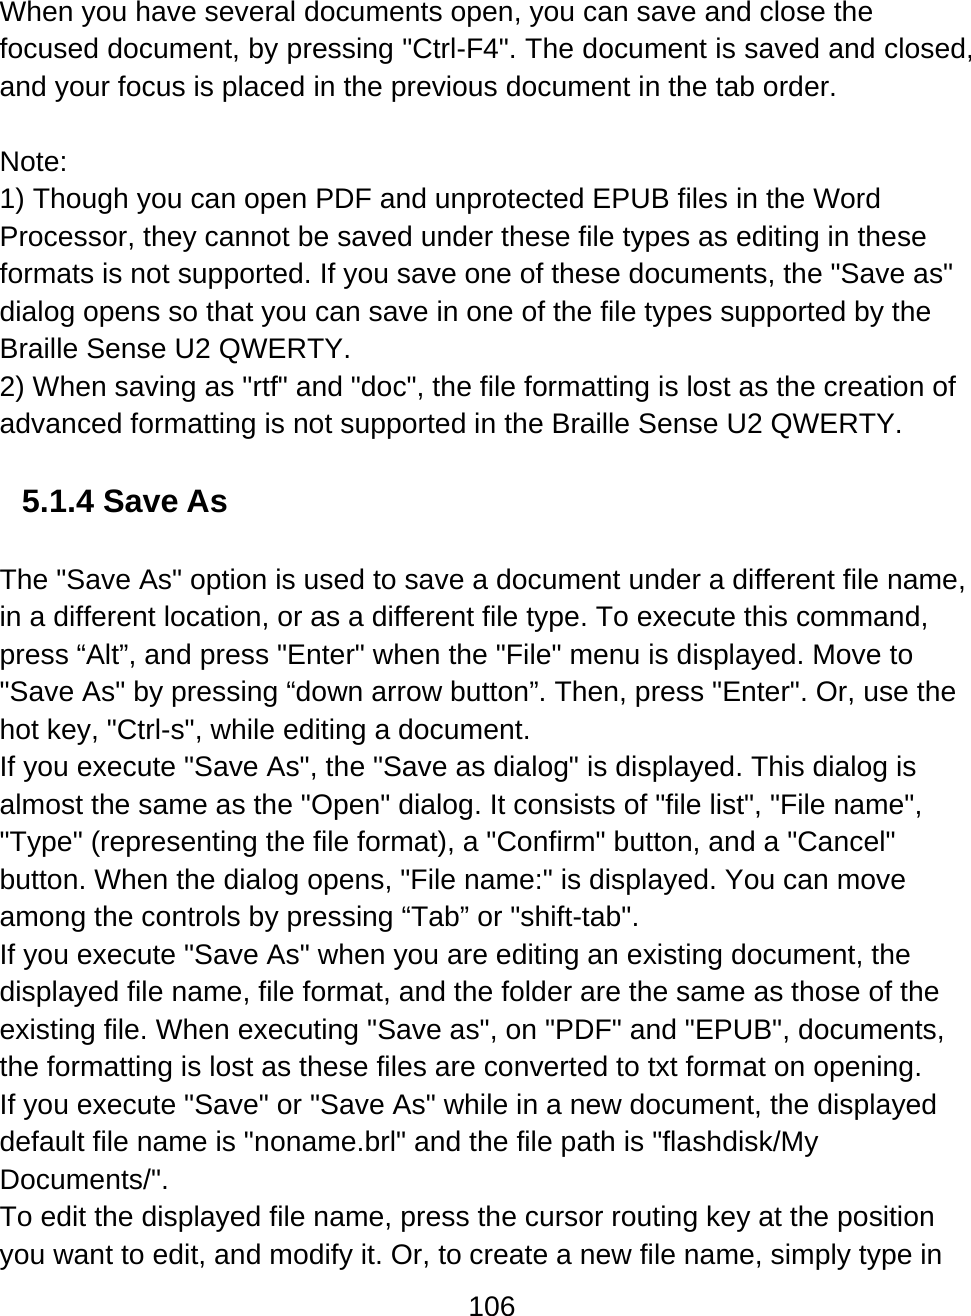 106  When you have several documents open, you can save and close the focused document, by pressing &quot;Ctrl-F4&quot;. The document is saved and closed, and your focus is placed in the previous document in the tab order.  Note: 1) Though you can open PDF and unprotected EPUB files in the Word Processor, they cannot be saved under these file types as editing in these formats is not supported. If you save one of these documents, the &quot;Save as&quot; dialog opens so that you can save in one of the file types supported by the Braille Sense U2 QWERTY.  2) When saving as &quot;rtf&quot; and &quot;doc&quot;, the file formatting is lost as the creation of advanced formatting is not supported in the Braille Sense U2 QWERTY.   5.1.4 Save As  The &quot;Save As&quot; option is used to save a document under a different file name, in a different location, or as a different file type. To execute this command, press “Alt”, and press &quot;Enter&quot; when the &quot;File&quot; menu is displayed. Move to &quot;Save As&quot; by pressing “down arrow button”. Then, press &quot;Enter&quot;. Or, use the hot key, &quot;Ctrl-s&quot;, while editing a document. If you execute &quot;Save As&quot;, the &quot;Save as dialog&quot; is displayed. This dialog is almost the same as the &quot;Open&quot; dialog. It consists of &quot;file list&quot;, &quot;File name&quot;, &quot;Type&quot; (representing the file format), a &quot;Confirm&quot; button, and a &quot;Cancel&quot; button. When the dialog opens, &quot;File name:&quot; is displayed. You can move among the controls by pressing “Tab” or &quot;shift-tab&quot;. If you execute &quot;Save As&quot; when you are editing an existing document, the displayed file name, file format, and the folder are the same as those of the existing file. When executing &quot;Save as&quot;, on &quot;PDF&quot; and &quot;EPUB&quot;, documents, the formatting is lost as these files are converted to txt format on opening. If you execute &quot;Save&quot; or &quot;Save As&quot; while in a new document, the displayed default file name is &quot;noname.brl&quot; and the file path is &quot;flashdisk/My Documents/&quot;. To edit the displayed file name, press the cursor routing key at the position you want to edit, and modify it. Or, to create a new file name, simply type in 